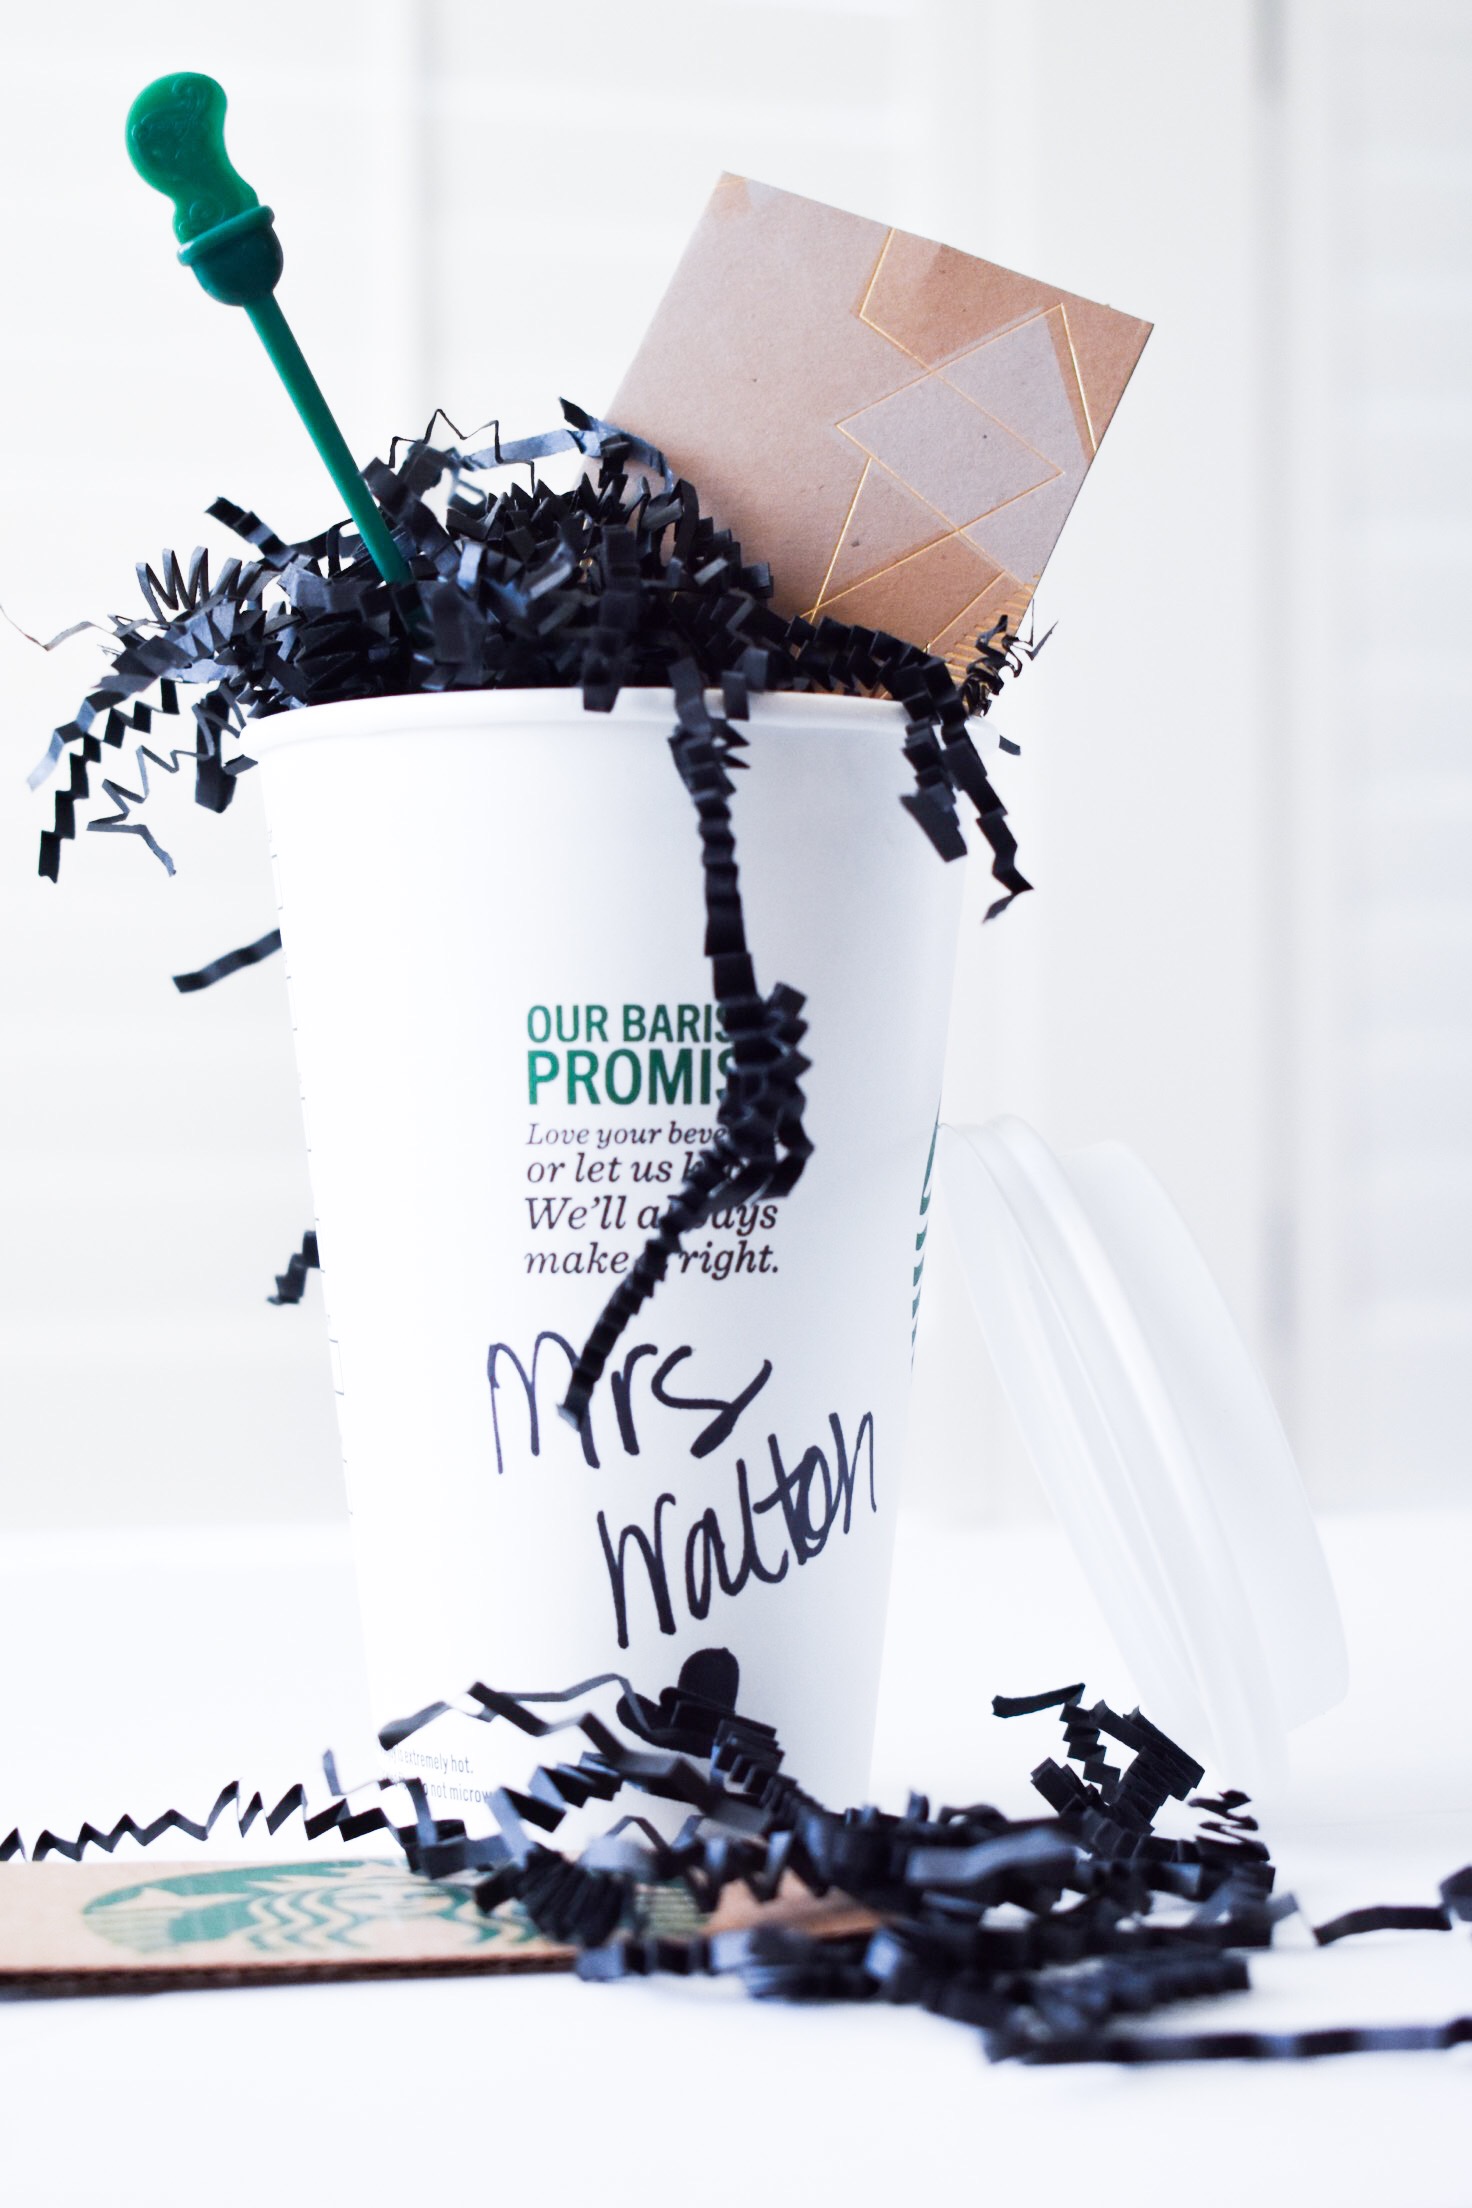 Teacher Wedding Gift Ideas - Preschool Teacher Wedding Gift. Looking for wedding gift ideas for teacher? This simple DIY gift is great for any Starbucks-loving teacher. Simply write her new married name on the coffee cup and throw in a gift card, and you've got the perfect teacher wedding gift idea! #Teacher #GiftIdeas #Starbucks